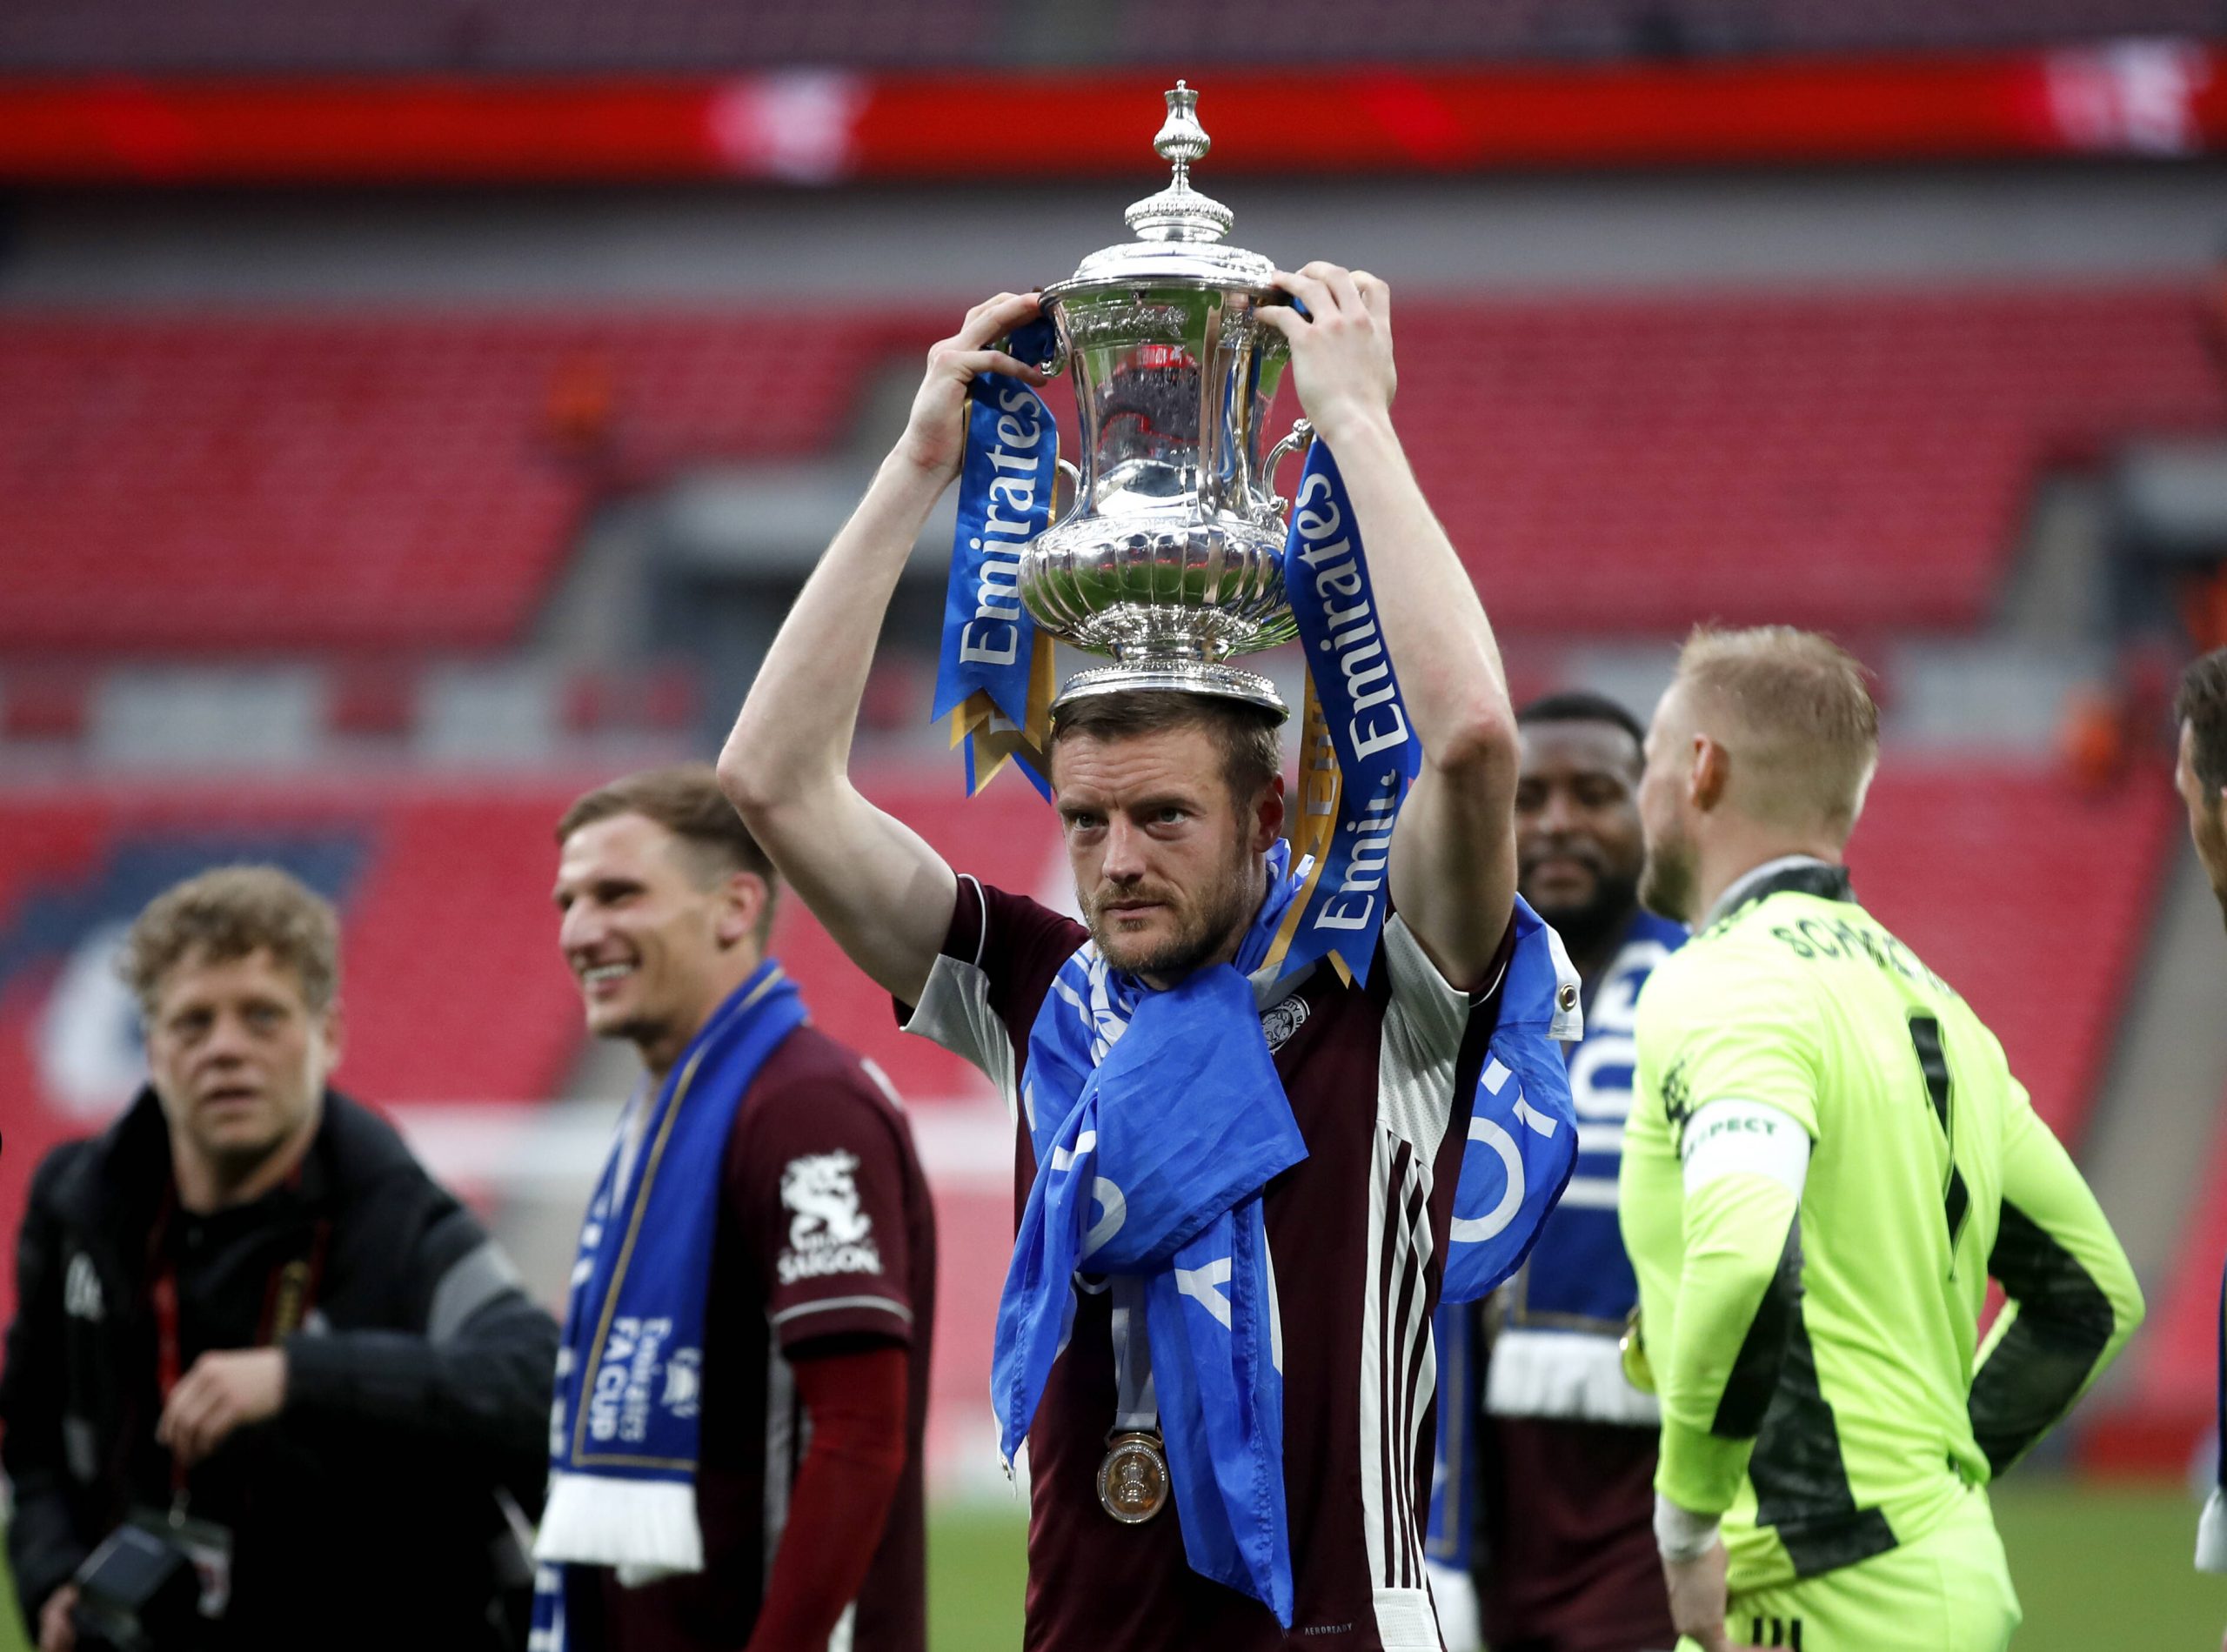 Football player celebrates FA Cup victory by keeping the trophy on his head